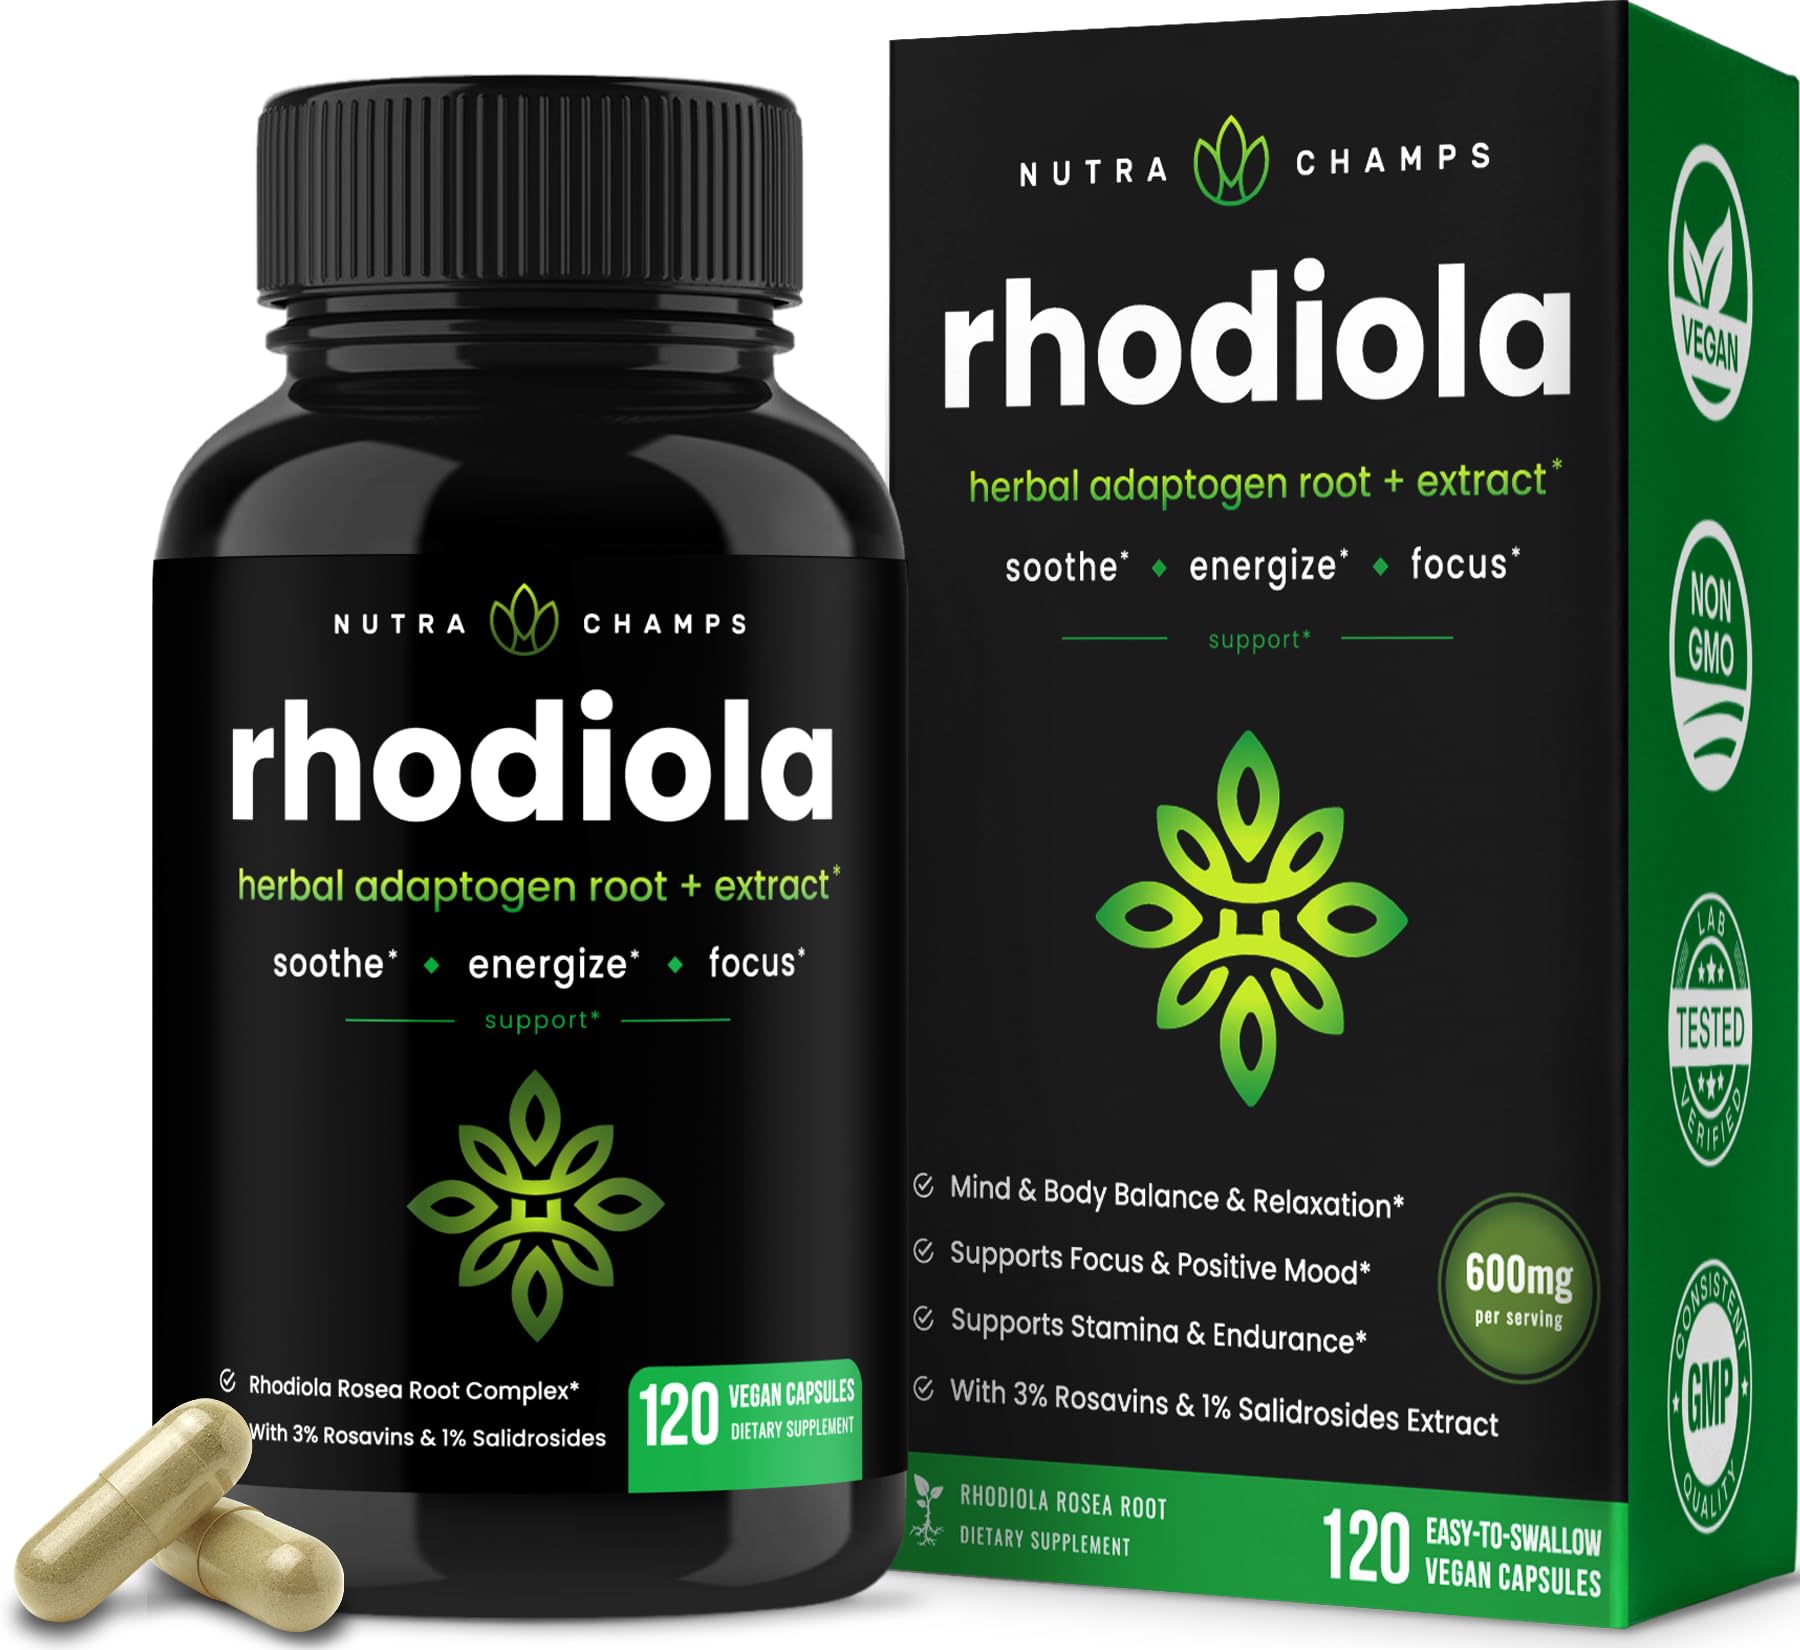 NutraChamps Rhodiola Rosea Capsules [120] Rosavin Plus Salidrosides | Rhodiola Rosea Extract Supplement | 300mg Vegan Pills | Rhodiola for Energy, Stress Relief, Mood Support and Focus